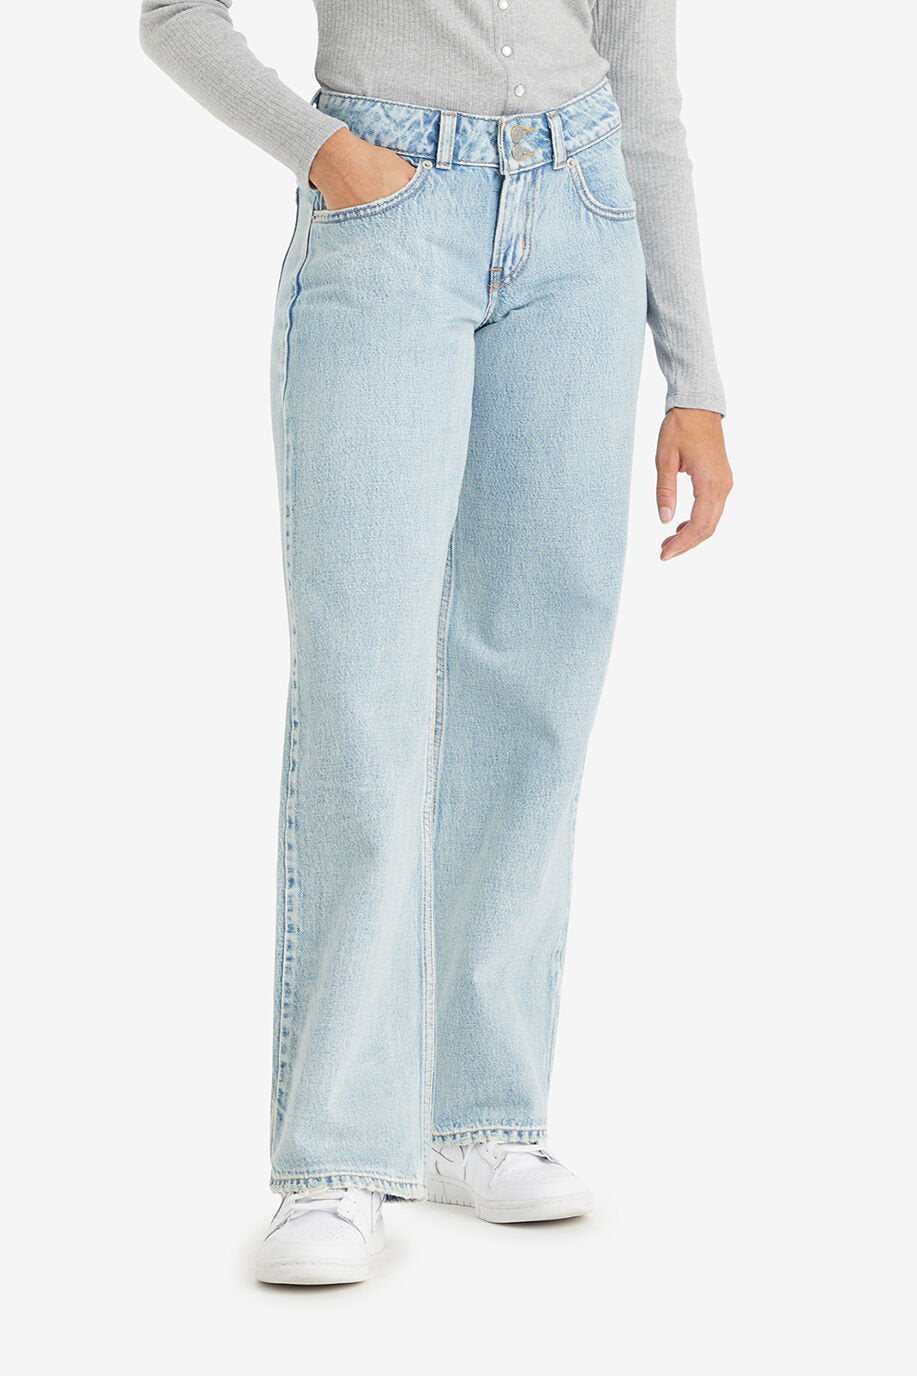 Levi's Superlow Jeans // Not In The Mood